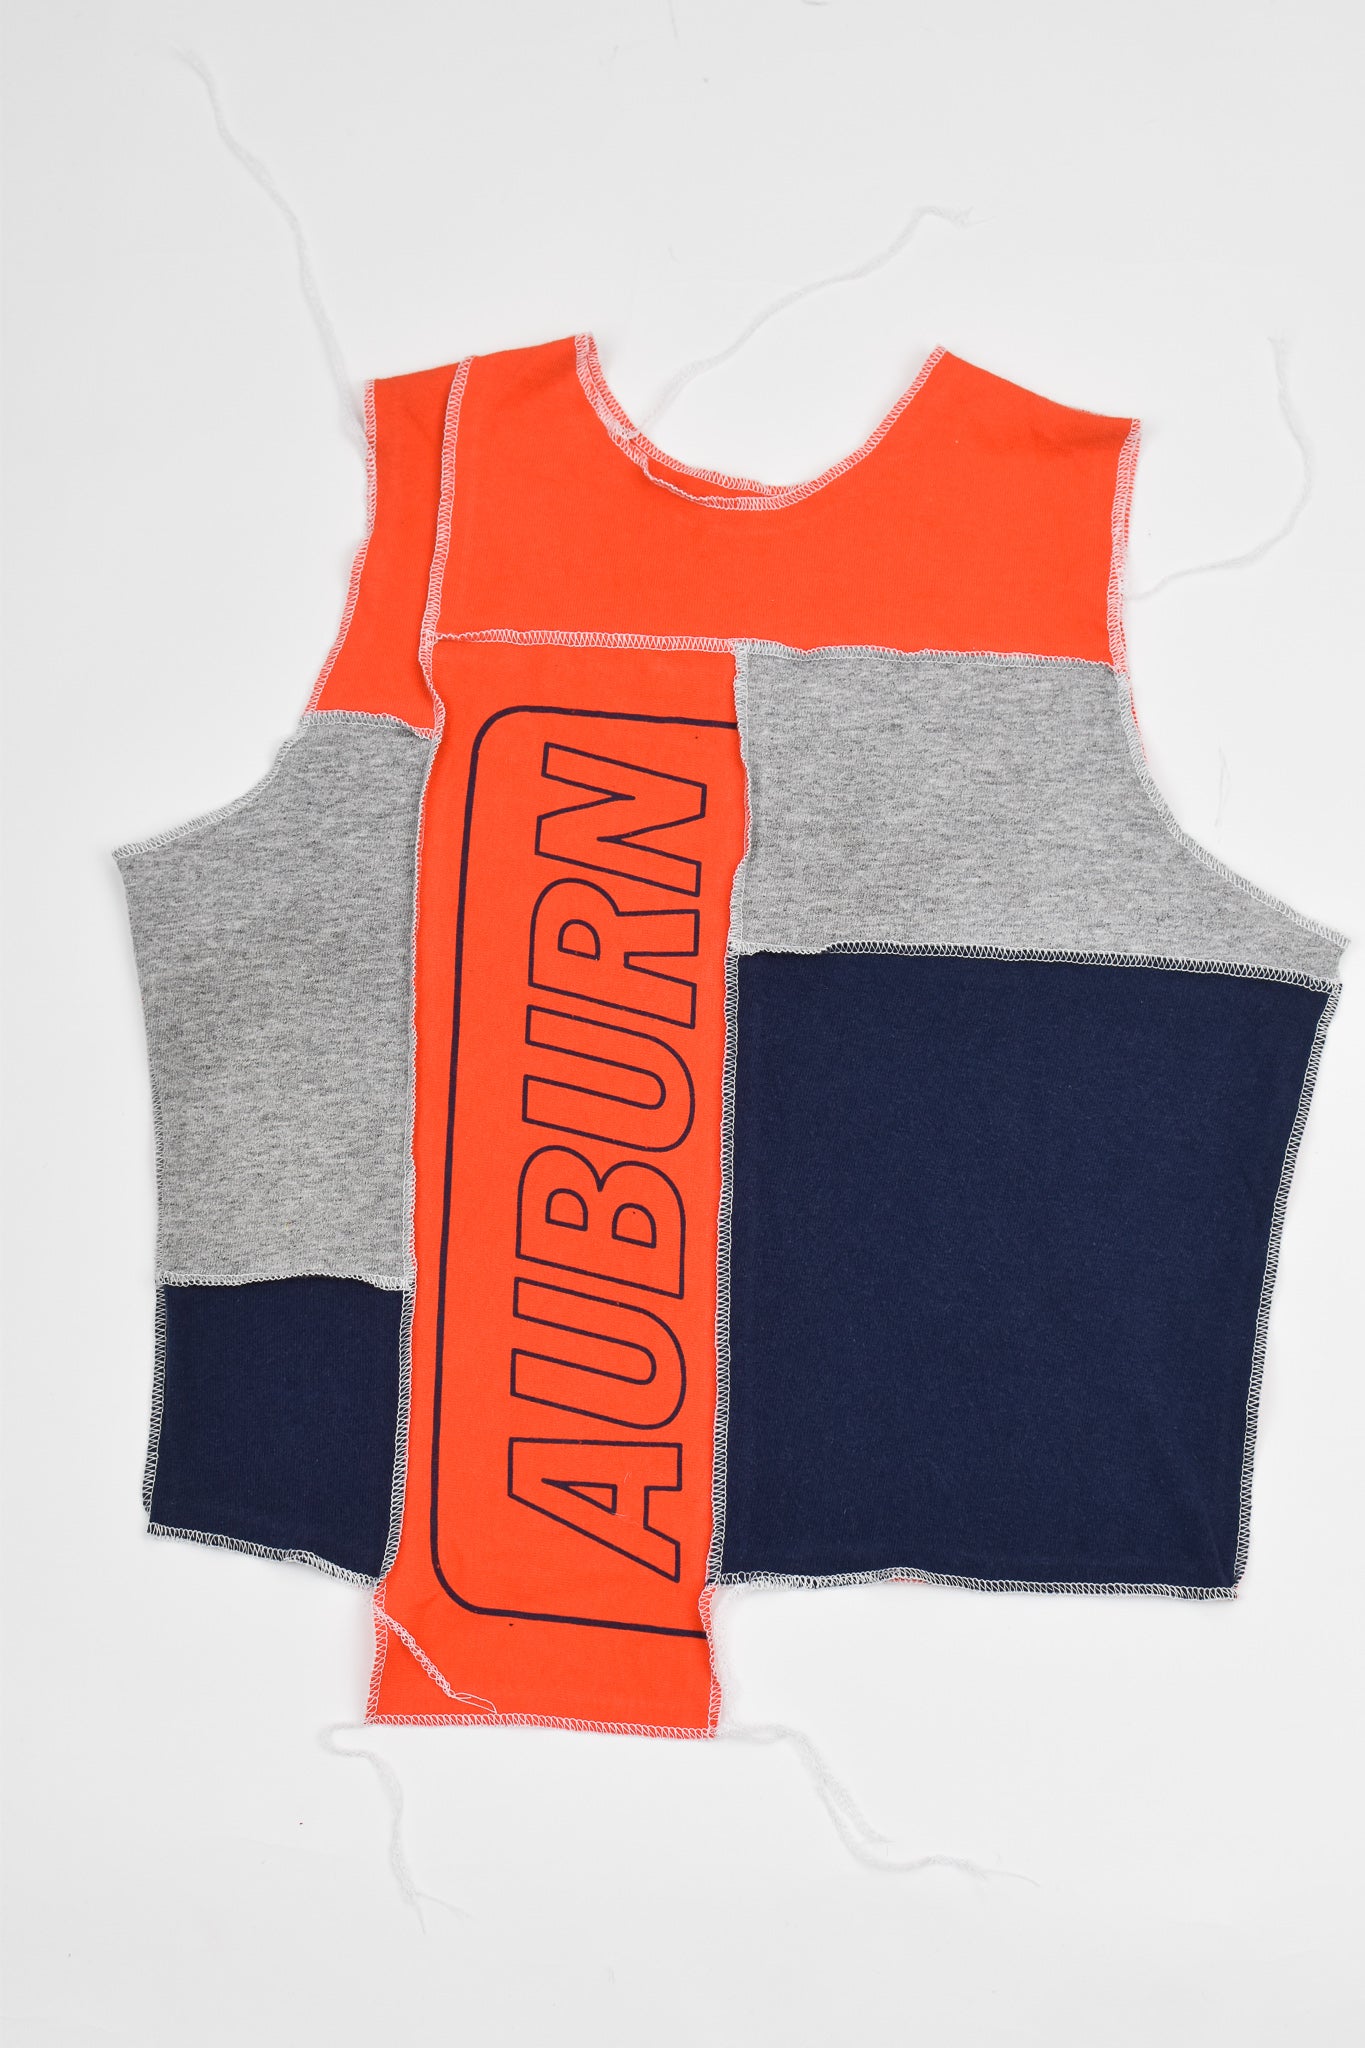 Upcycled Auburn Scrappy Tank Top